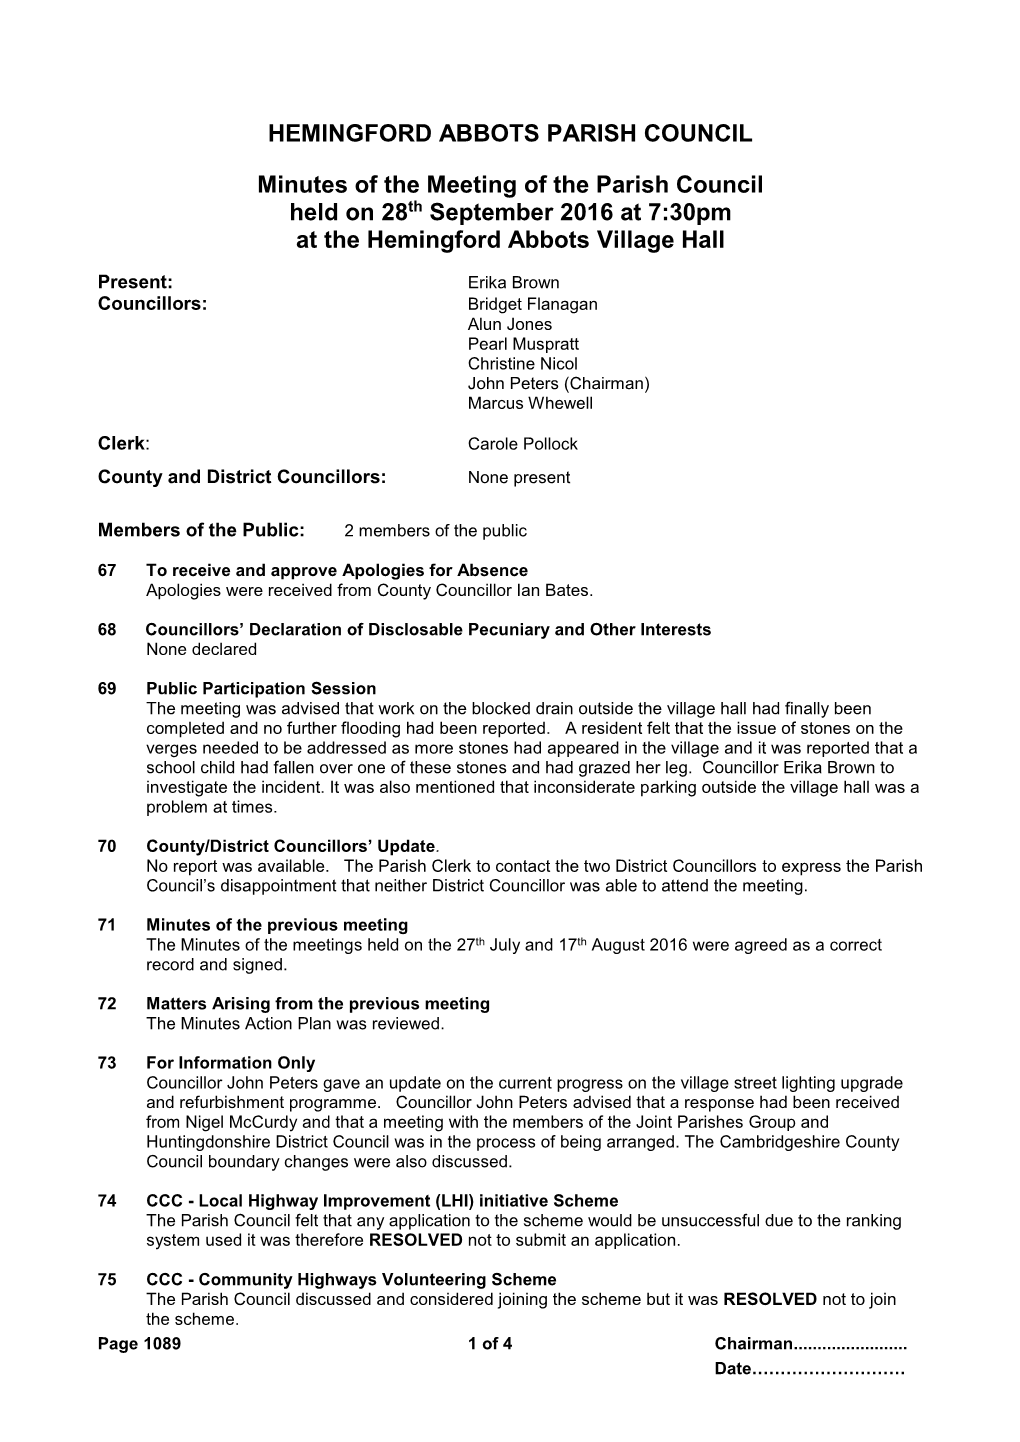 HEMINGFORD ABBOTS PARISH COUNCIL Minutes of the Meeting Of